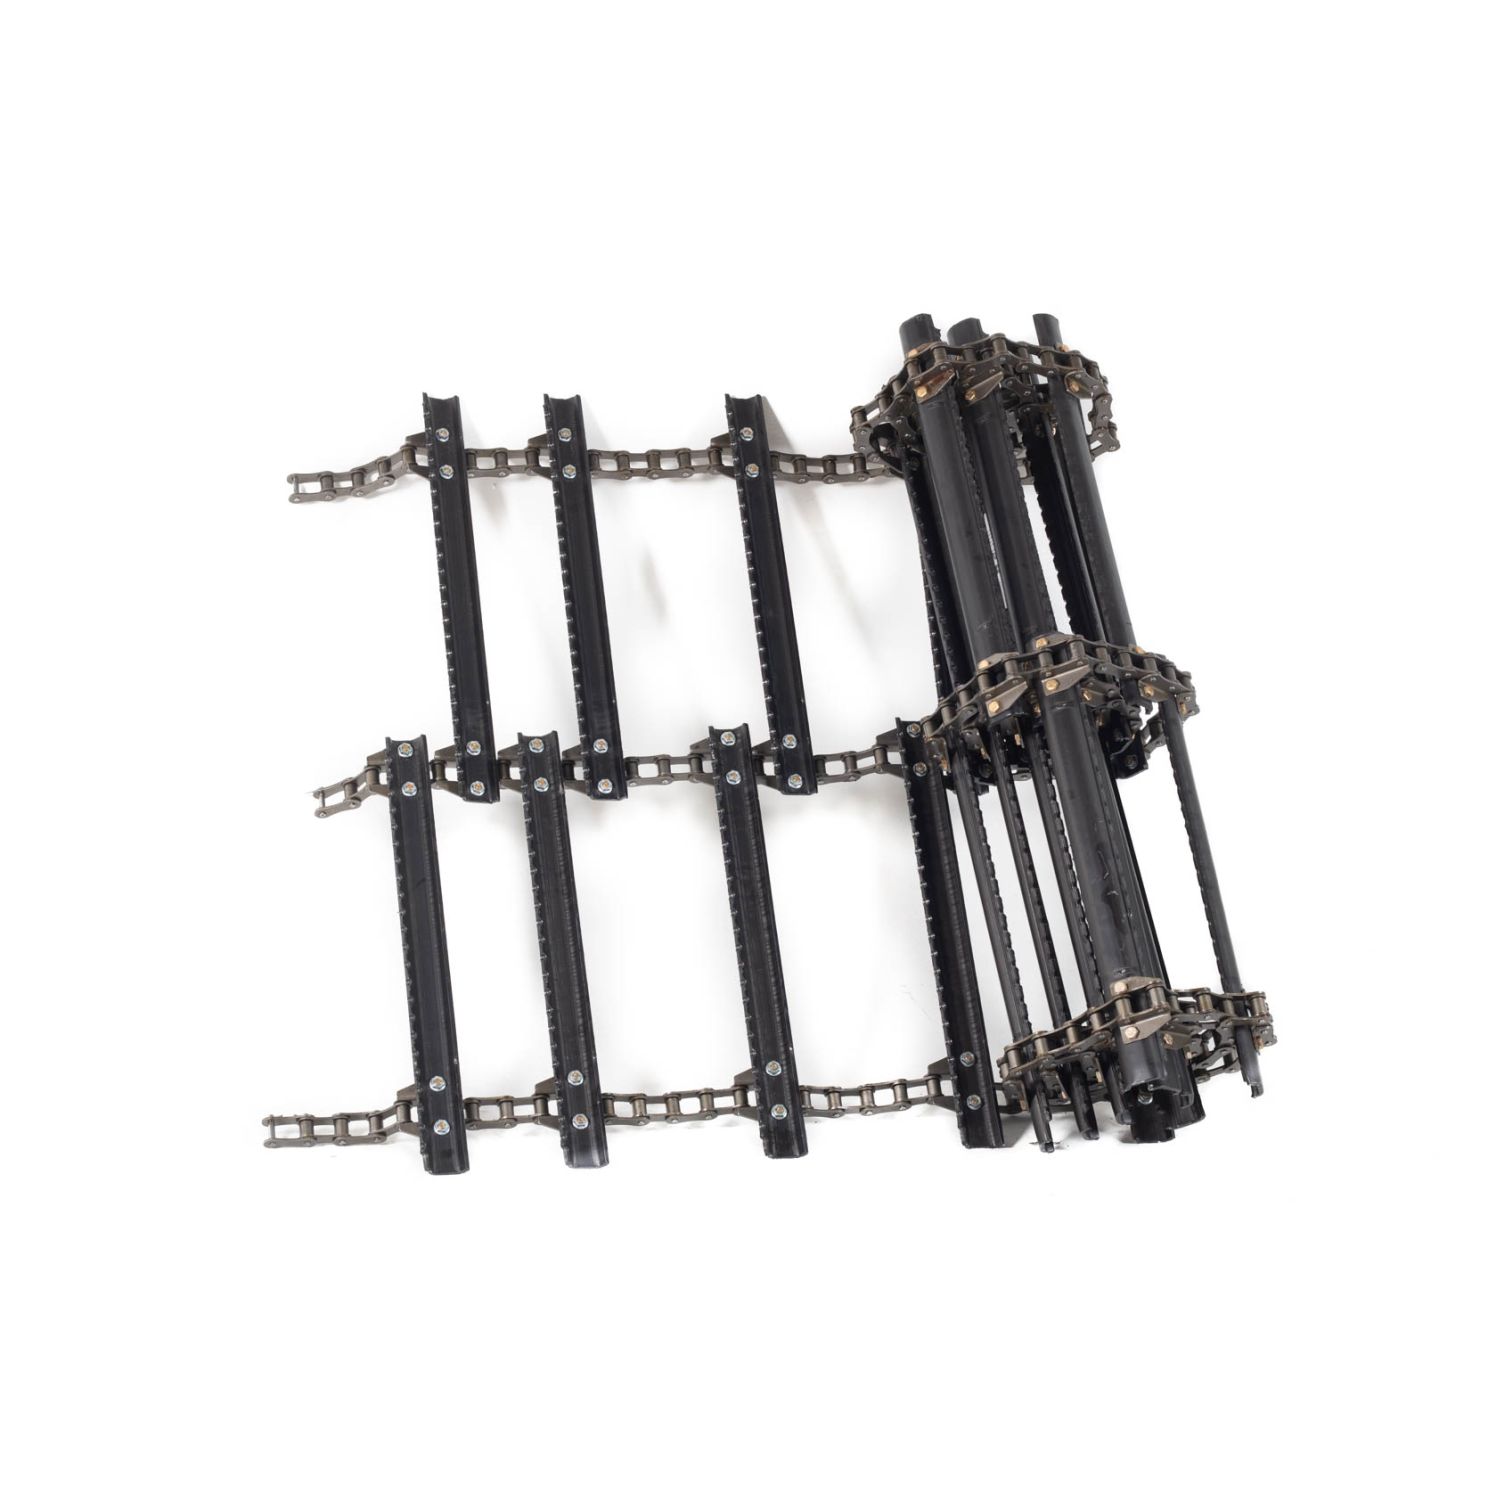 195670A2 Combine Feeder Chain for 60'' Feeder with Serrated Slats fits Case-IH